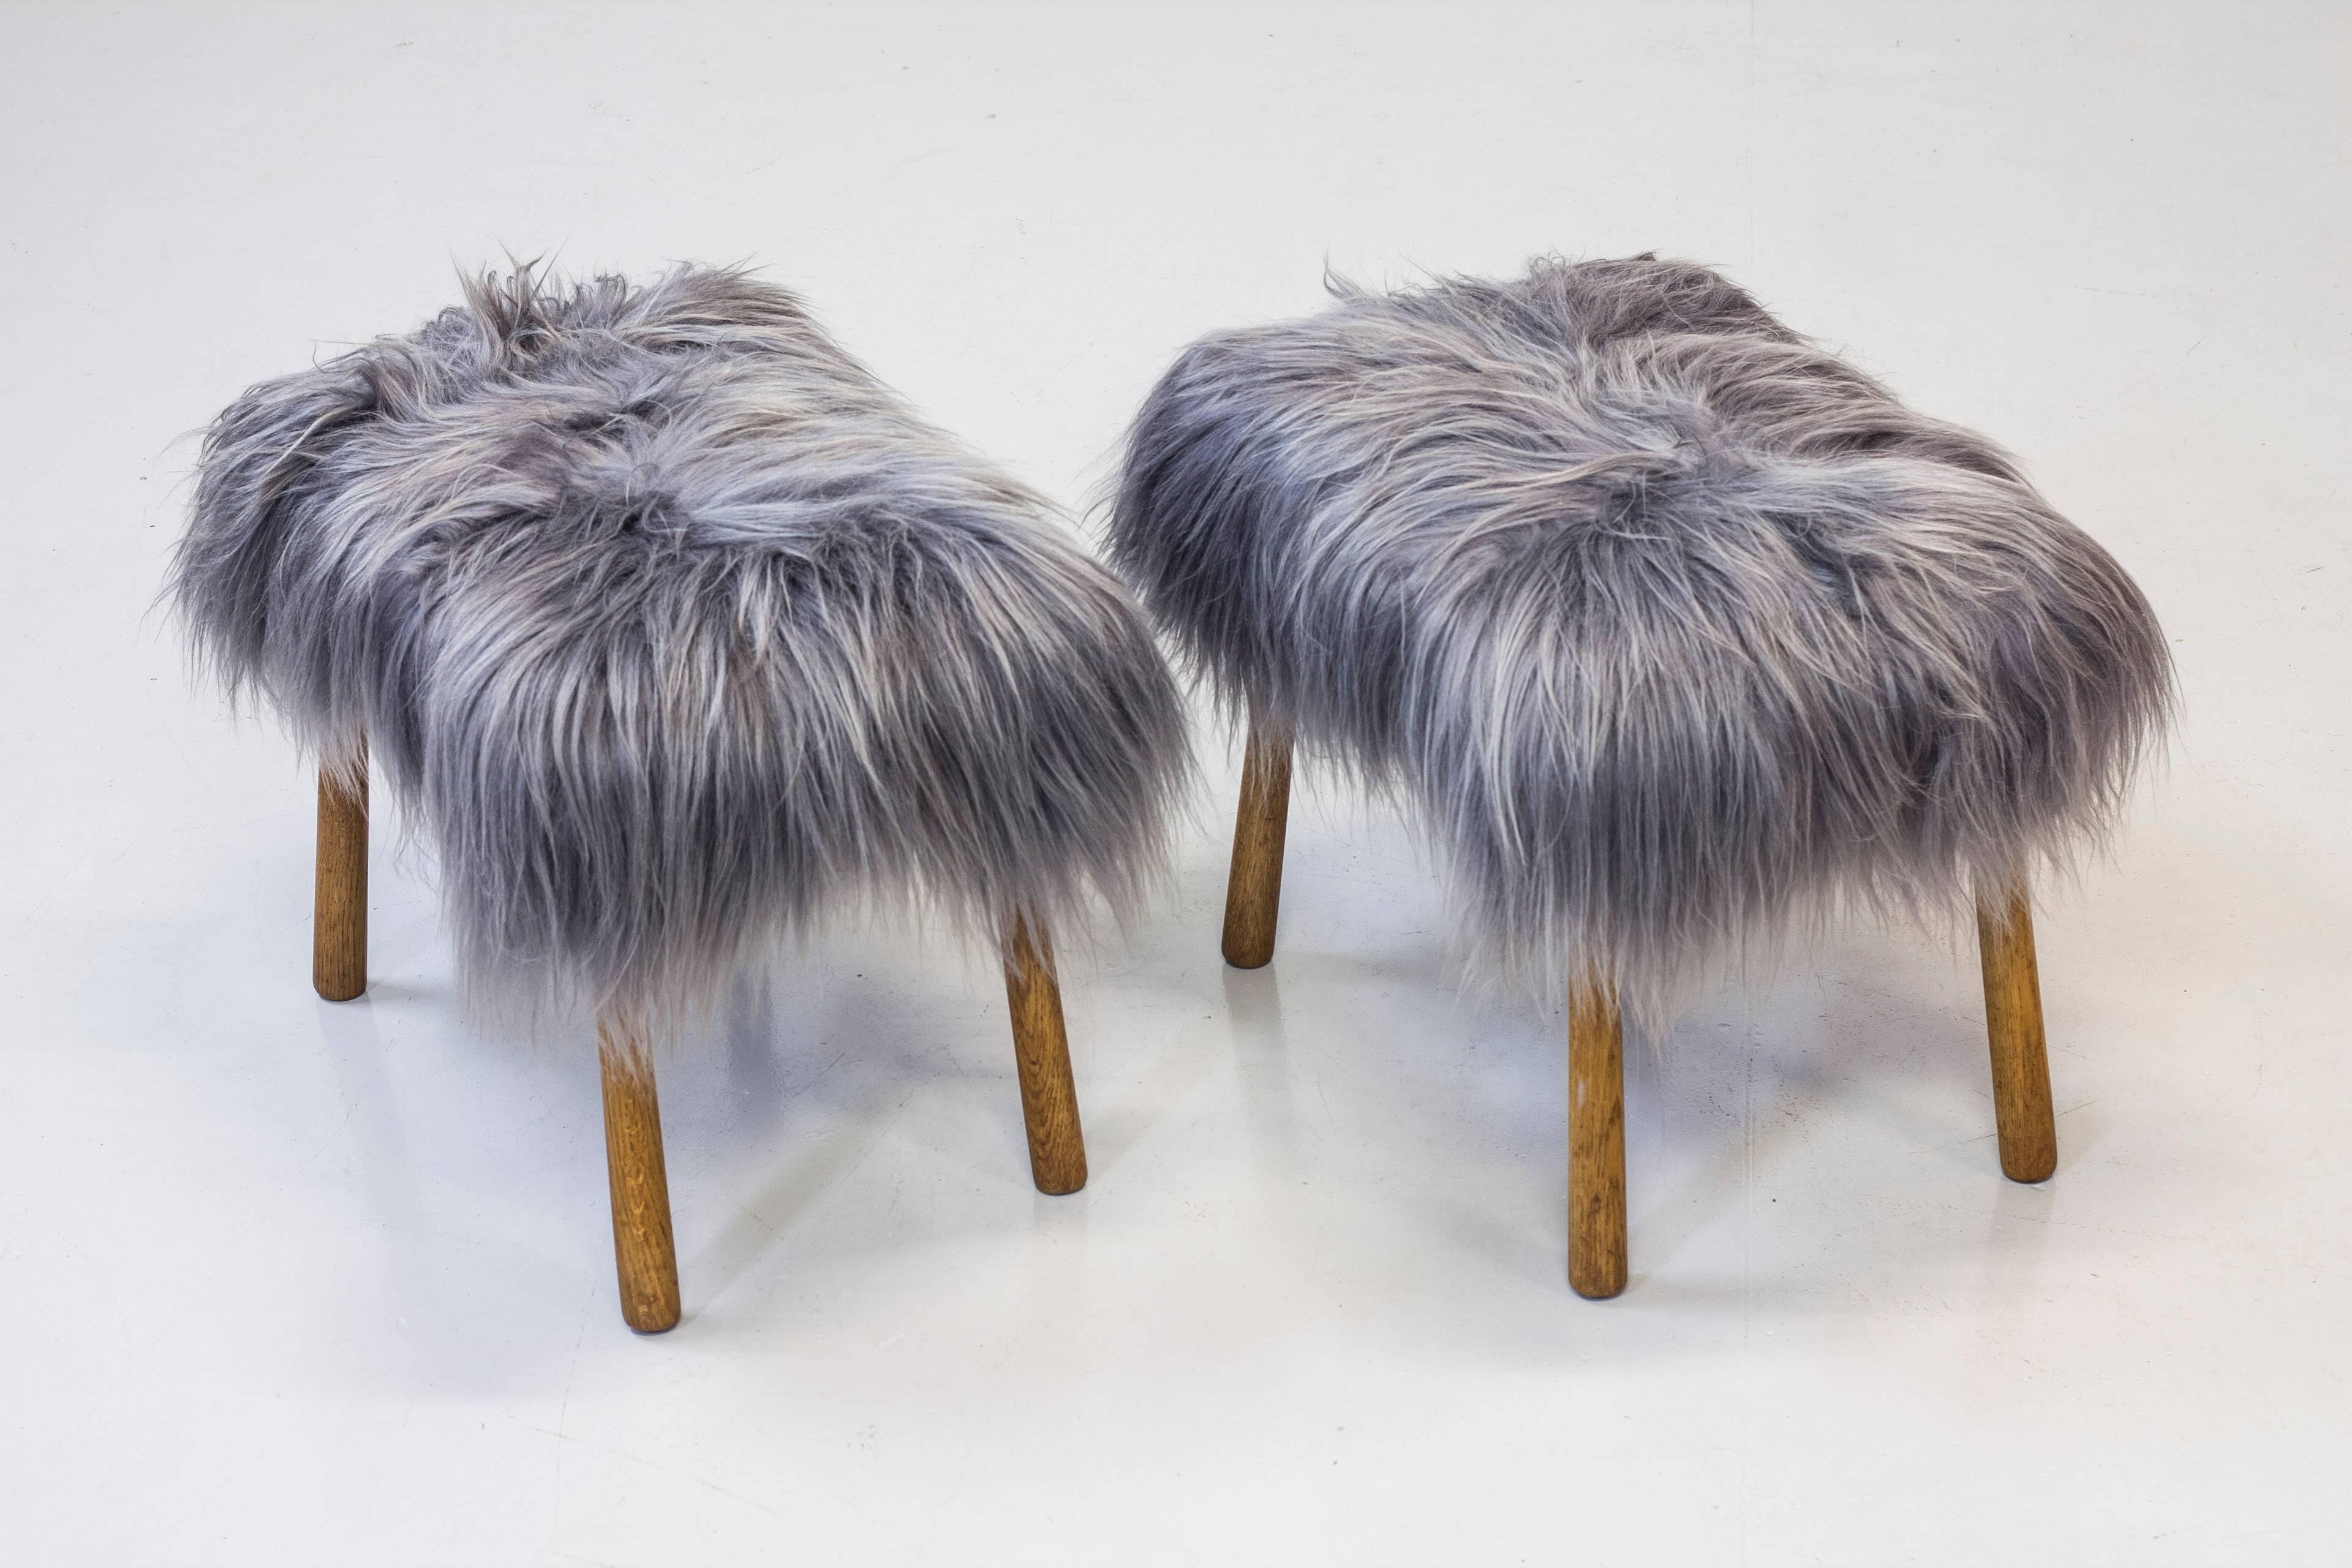 Pair of stools designed by unknown Danish interior architect. Produced by cabinet maker in Denmark around the 1940s. Standing on four club shaped solid oak legs with oil finish. Reupholstered with grey Icelandic sheepskin. Excellent condition with